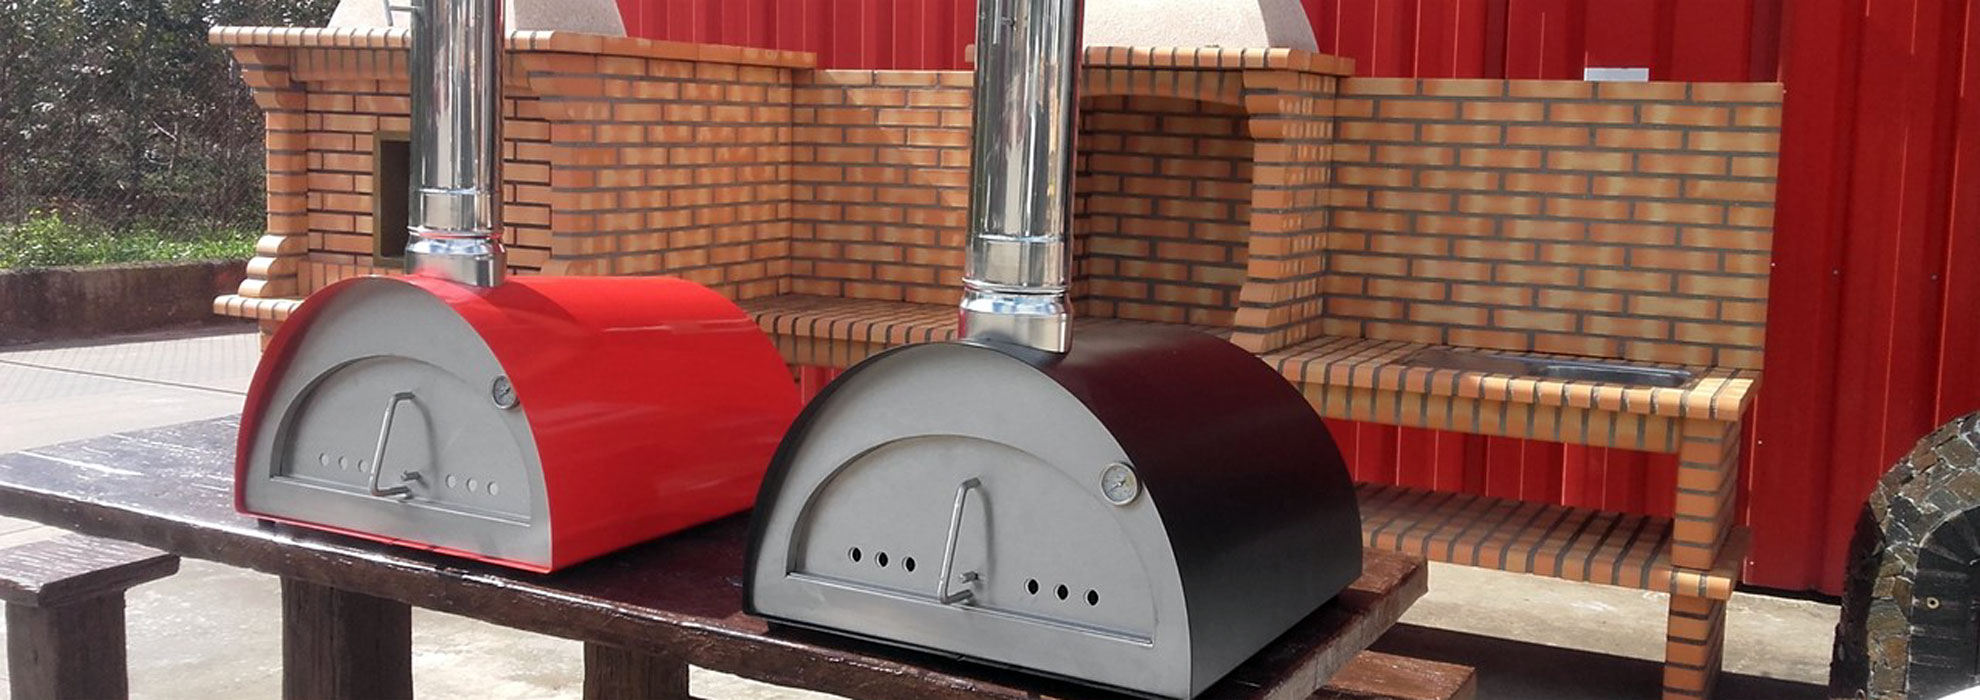 Pizza Ovens to buy online